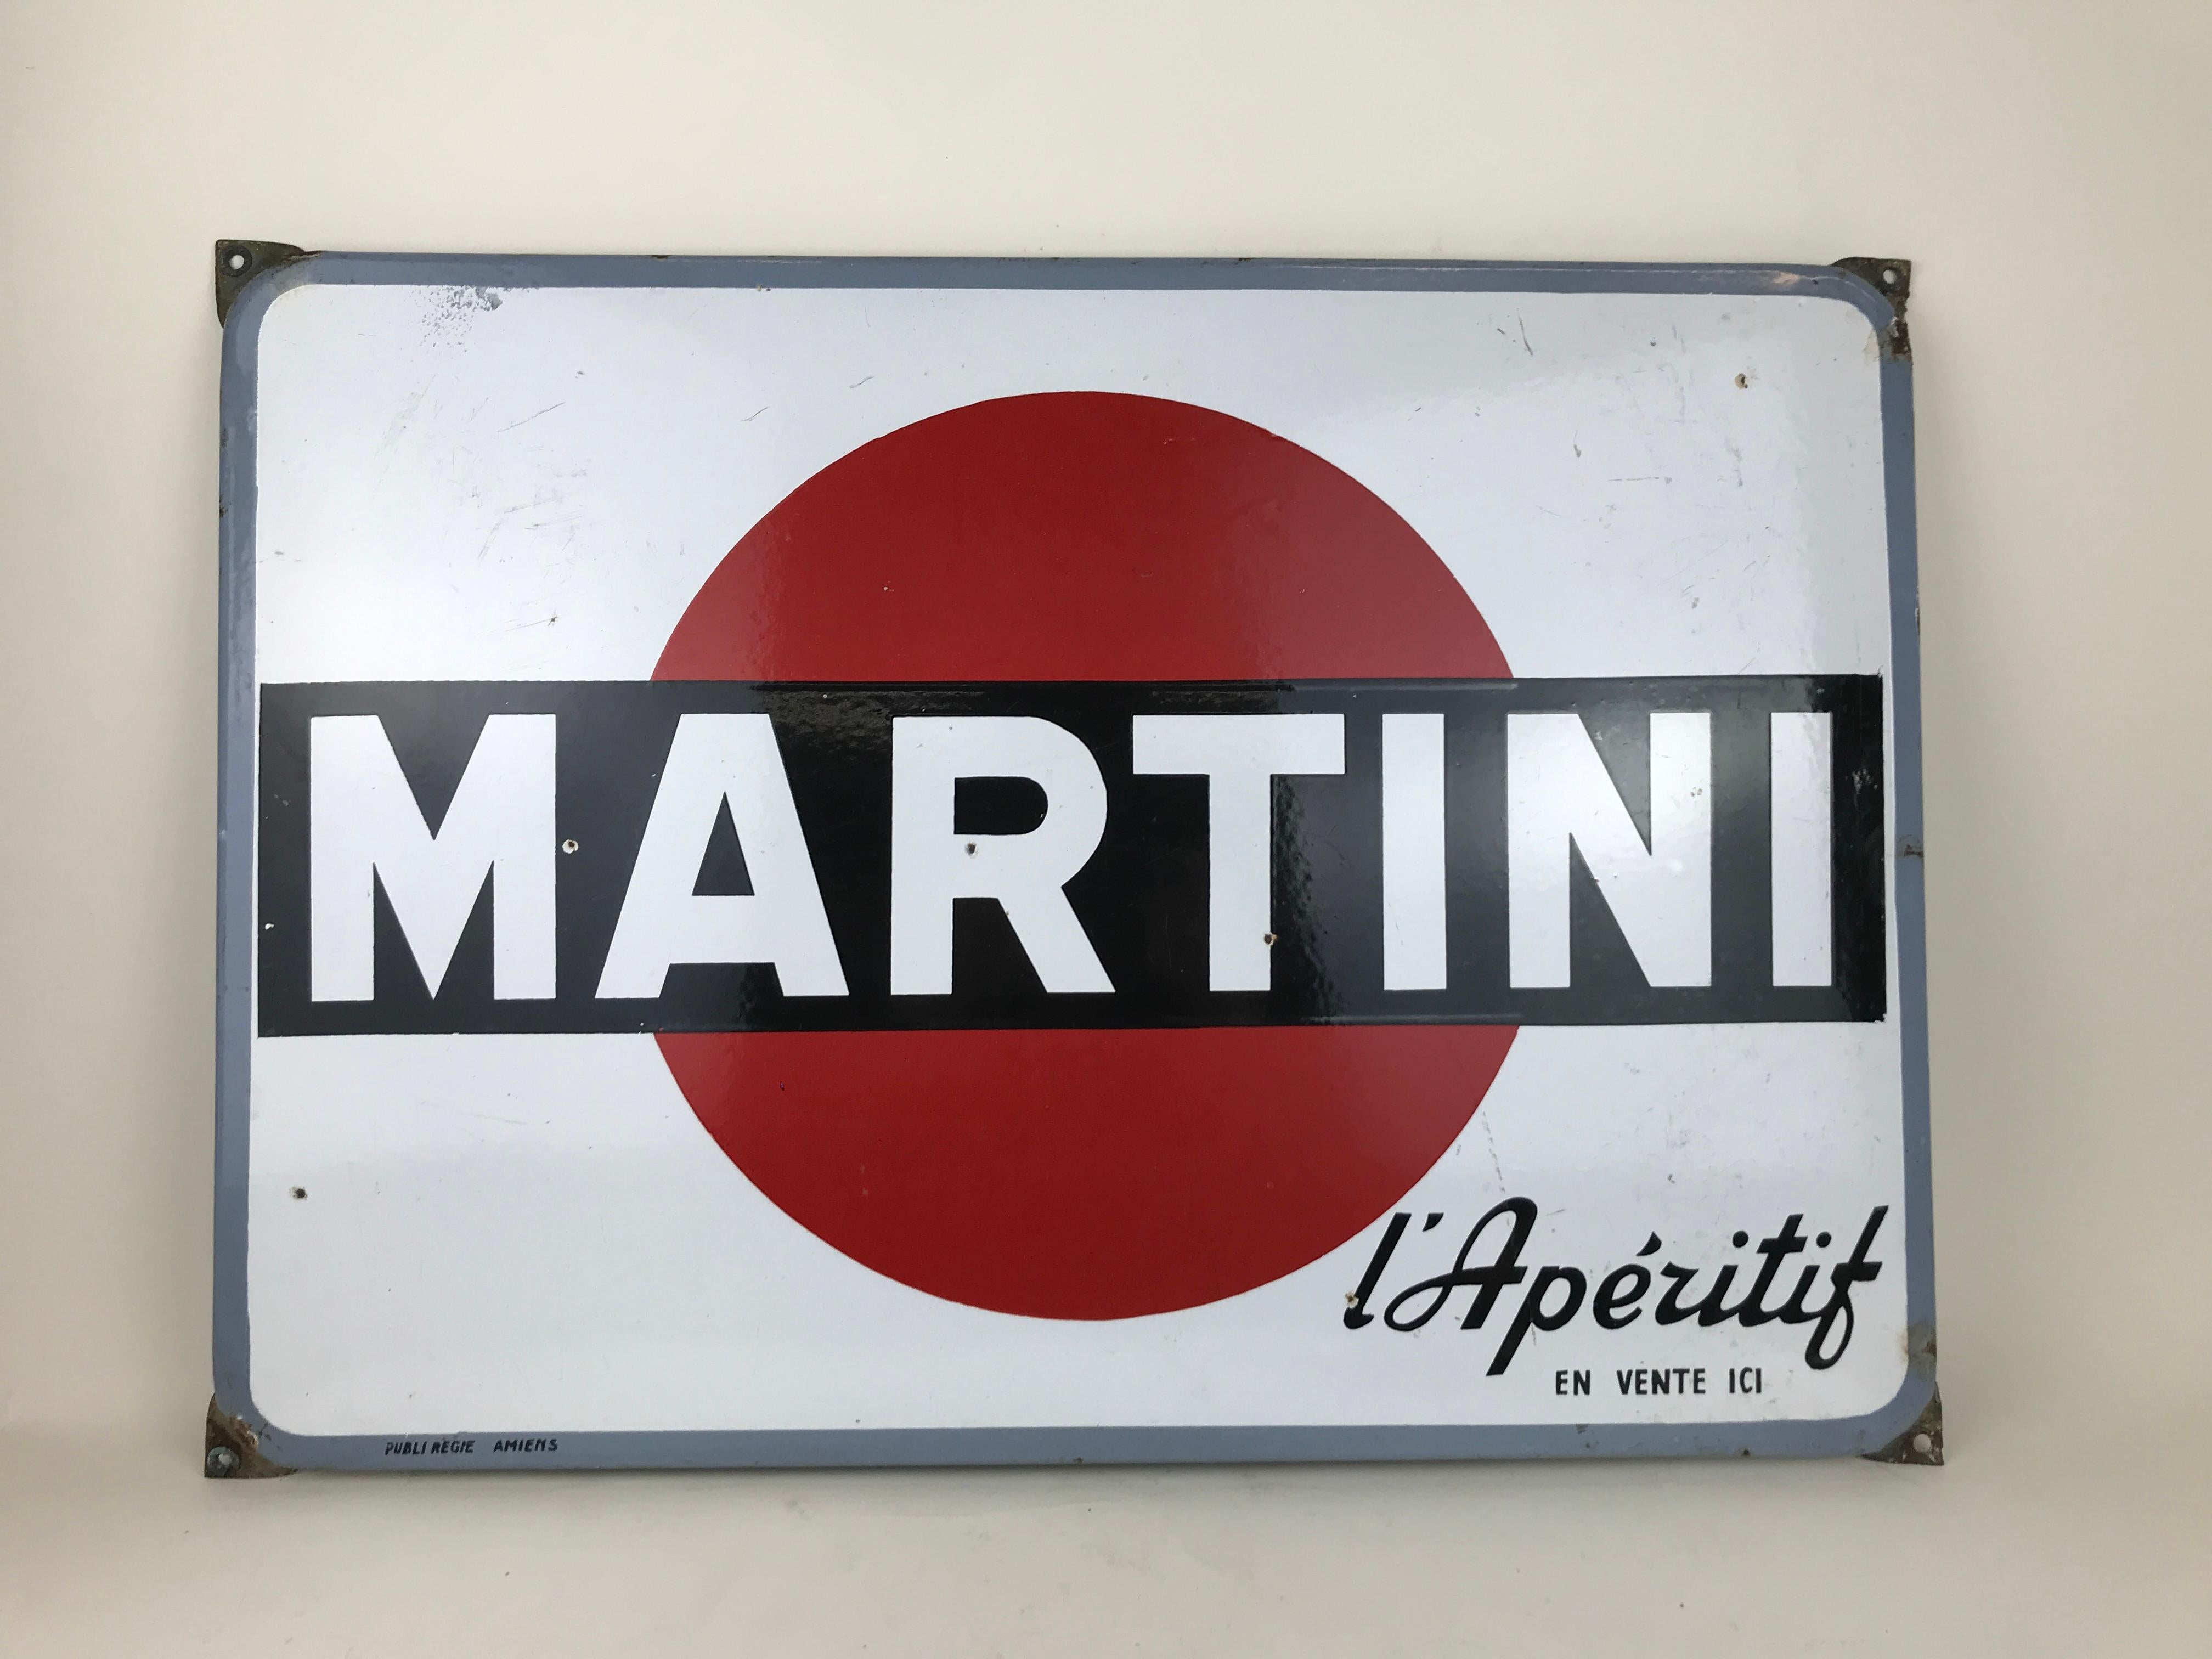 Mid-Century Modern 1960s Vintage French Enamel Metal Martini L' Aperitif Advertising Sign For Sale